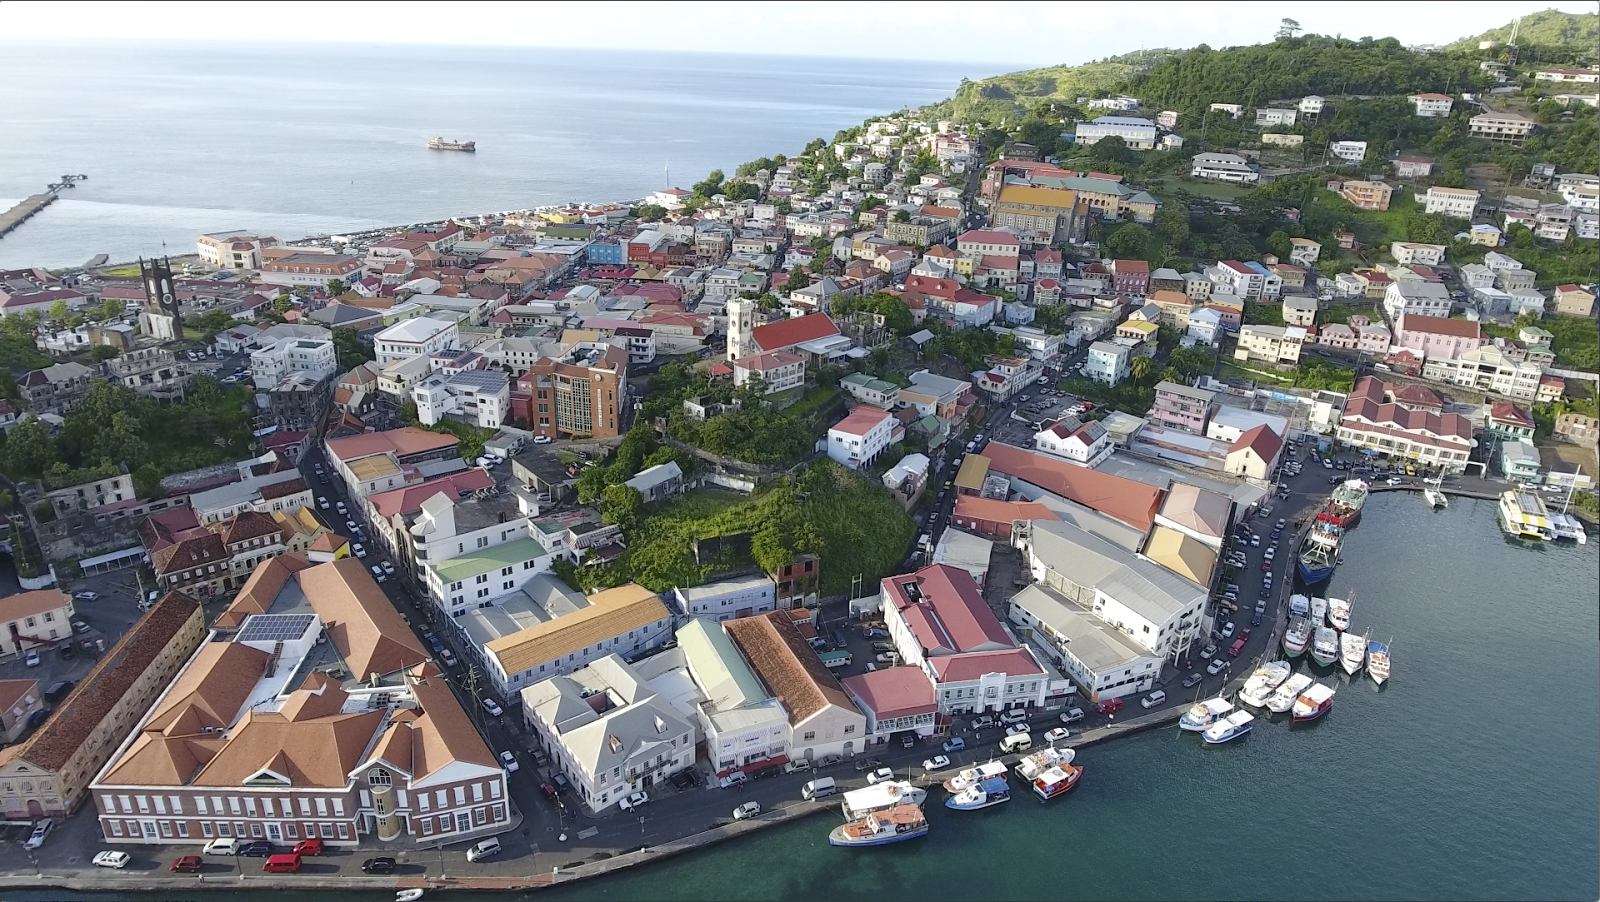 Drone image of St. George's, Grenada